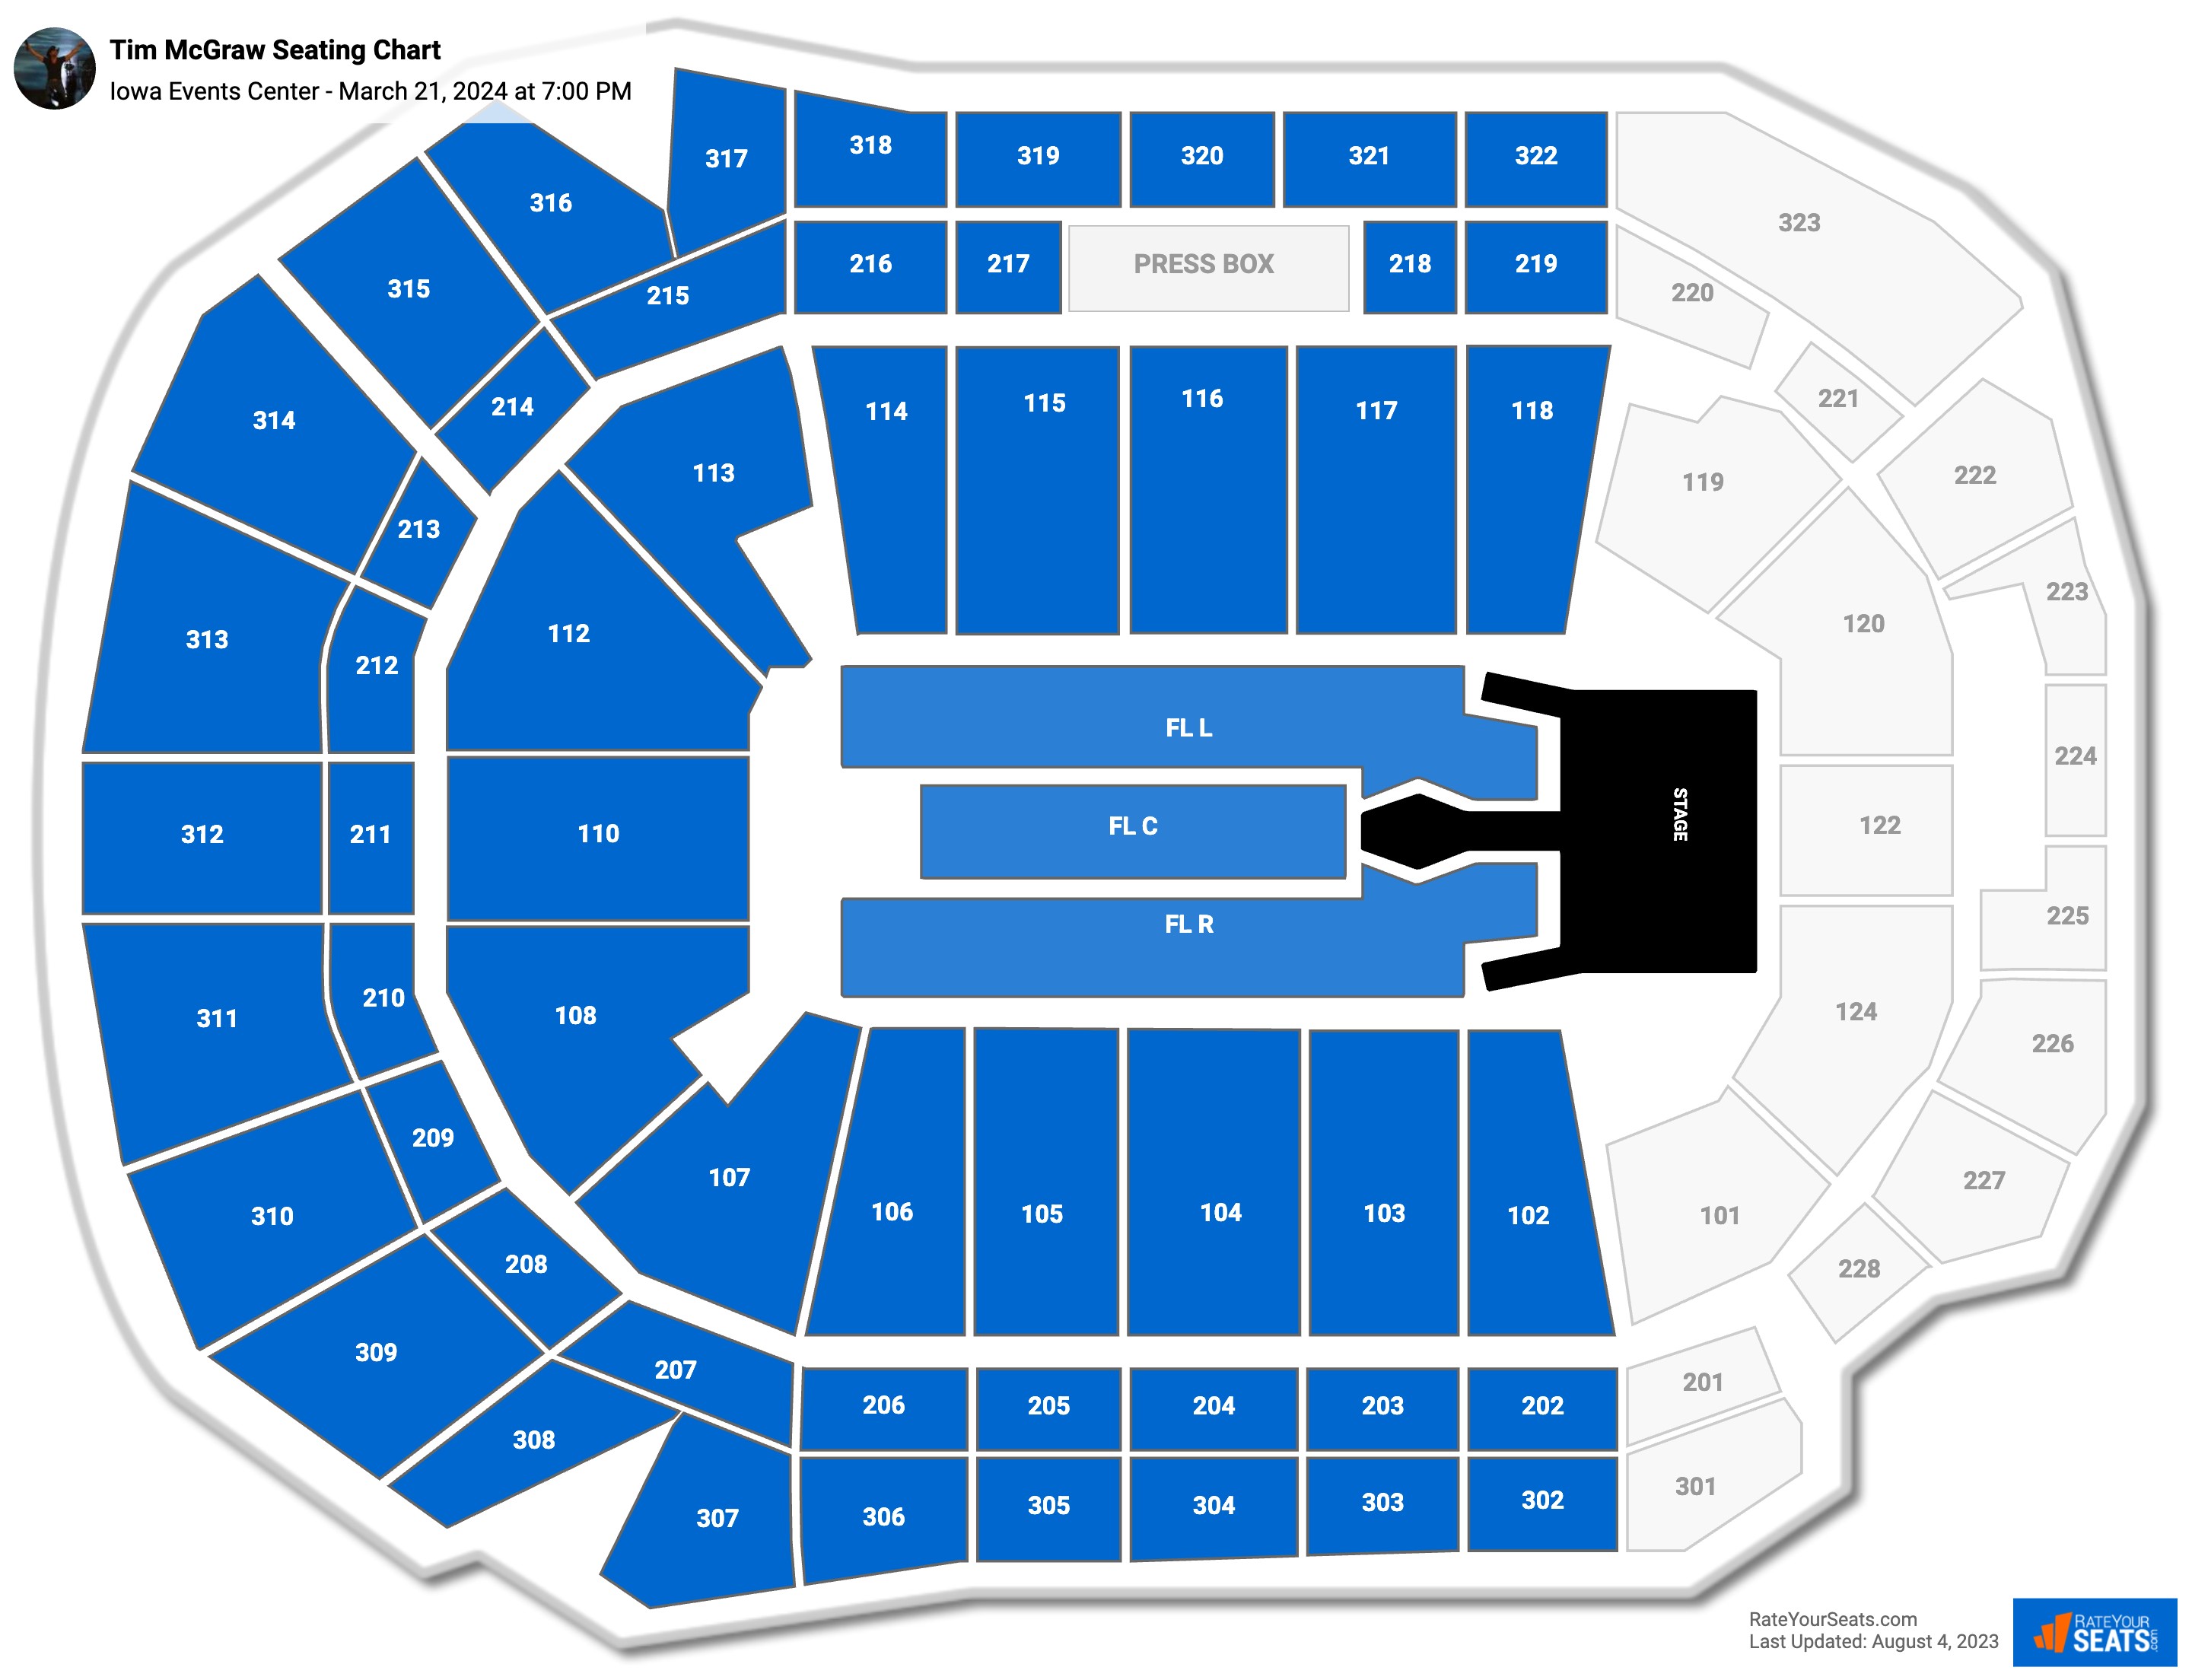 Iowa Events Center Concert Seating Chart